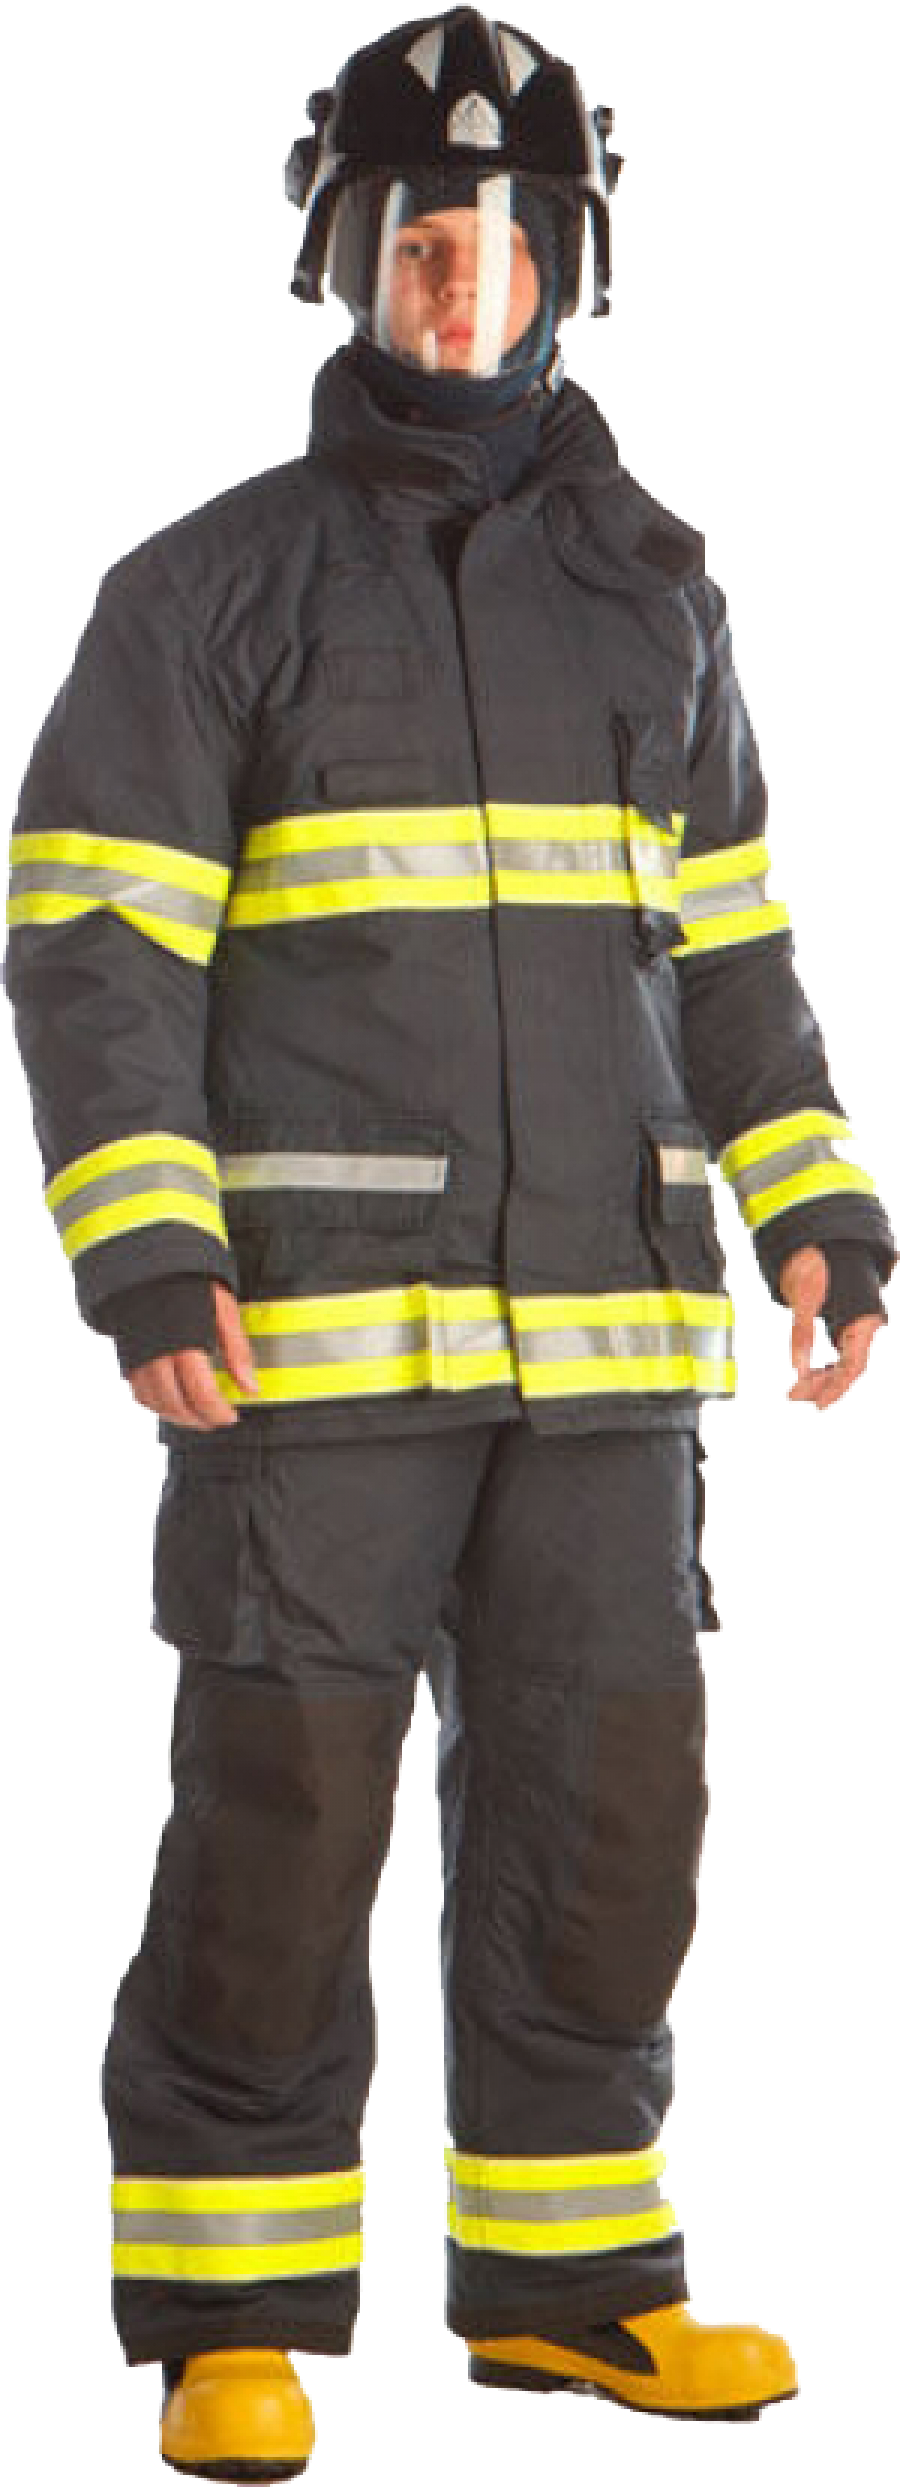 Firefighter png images free. Fireman clipart jacket